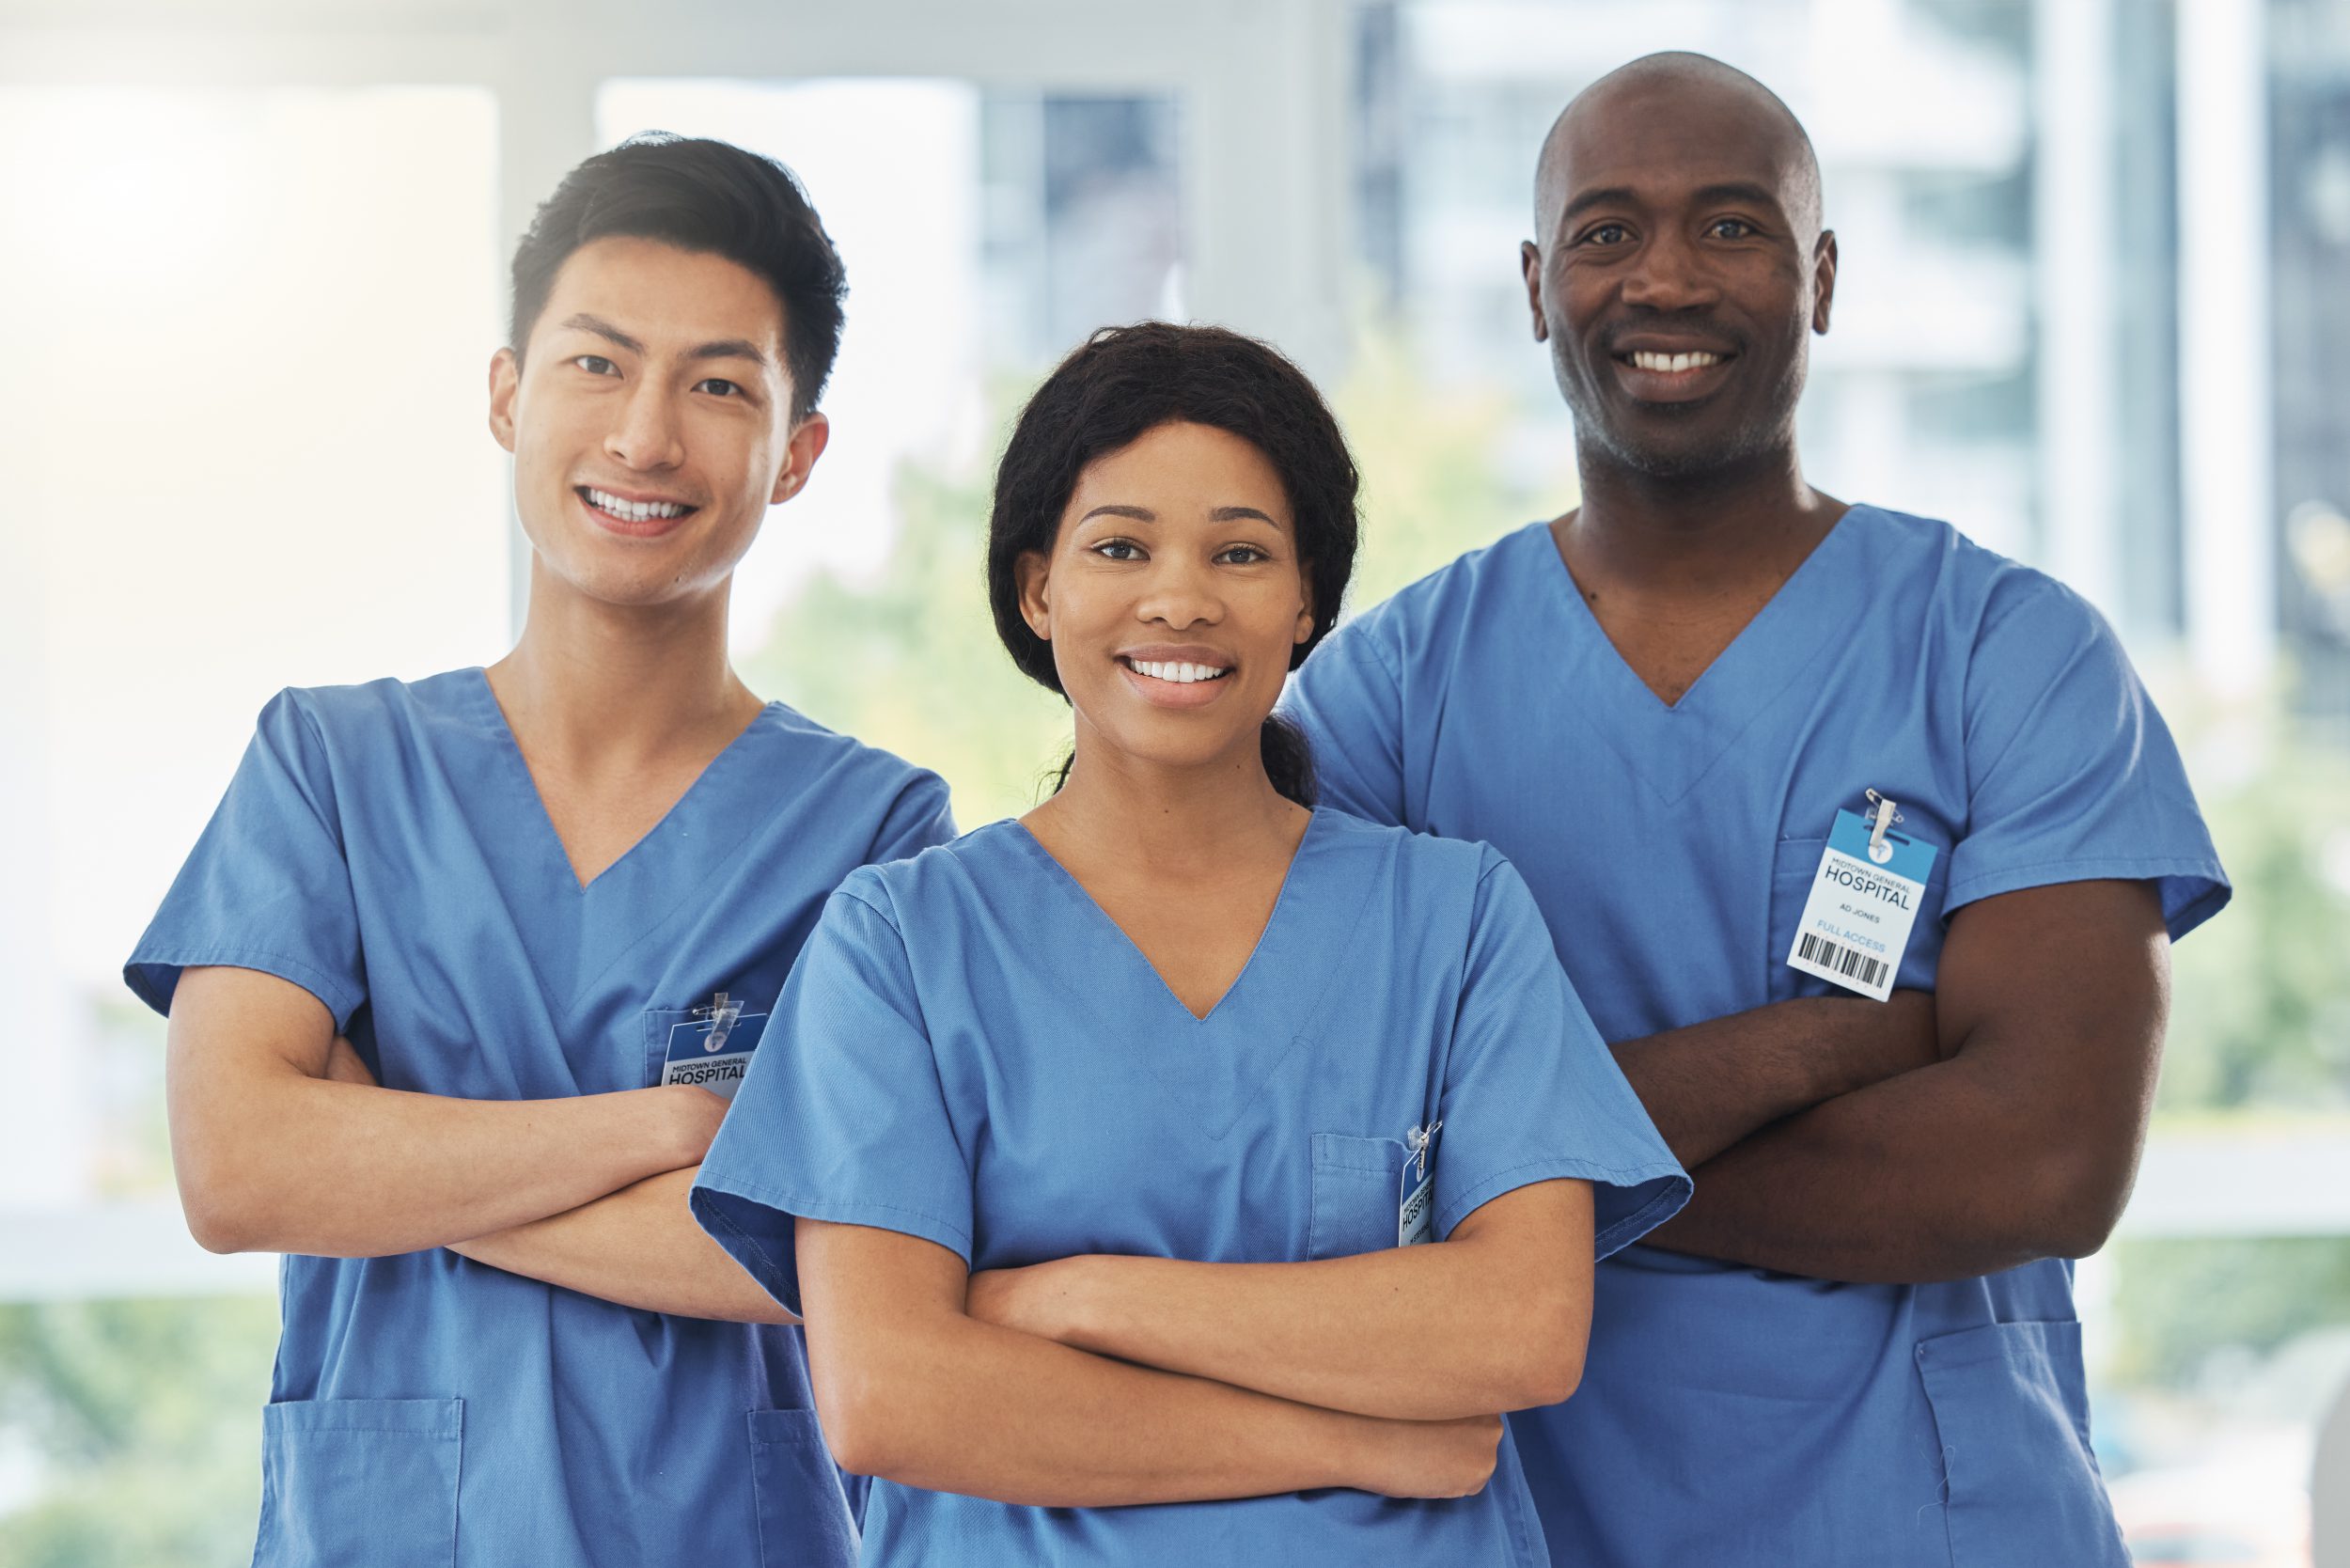 Portrait of a group of medical practitioners like nurses standing together with their arms crossed